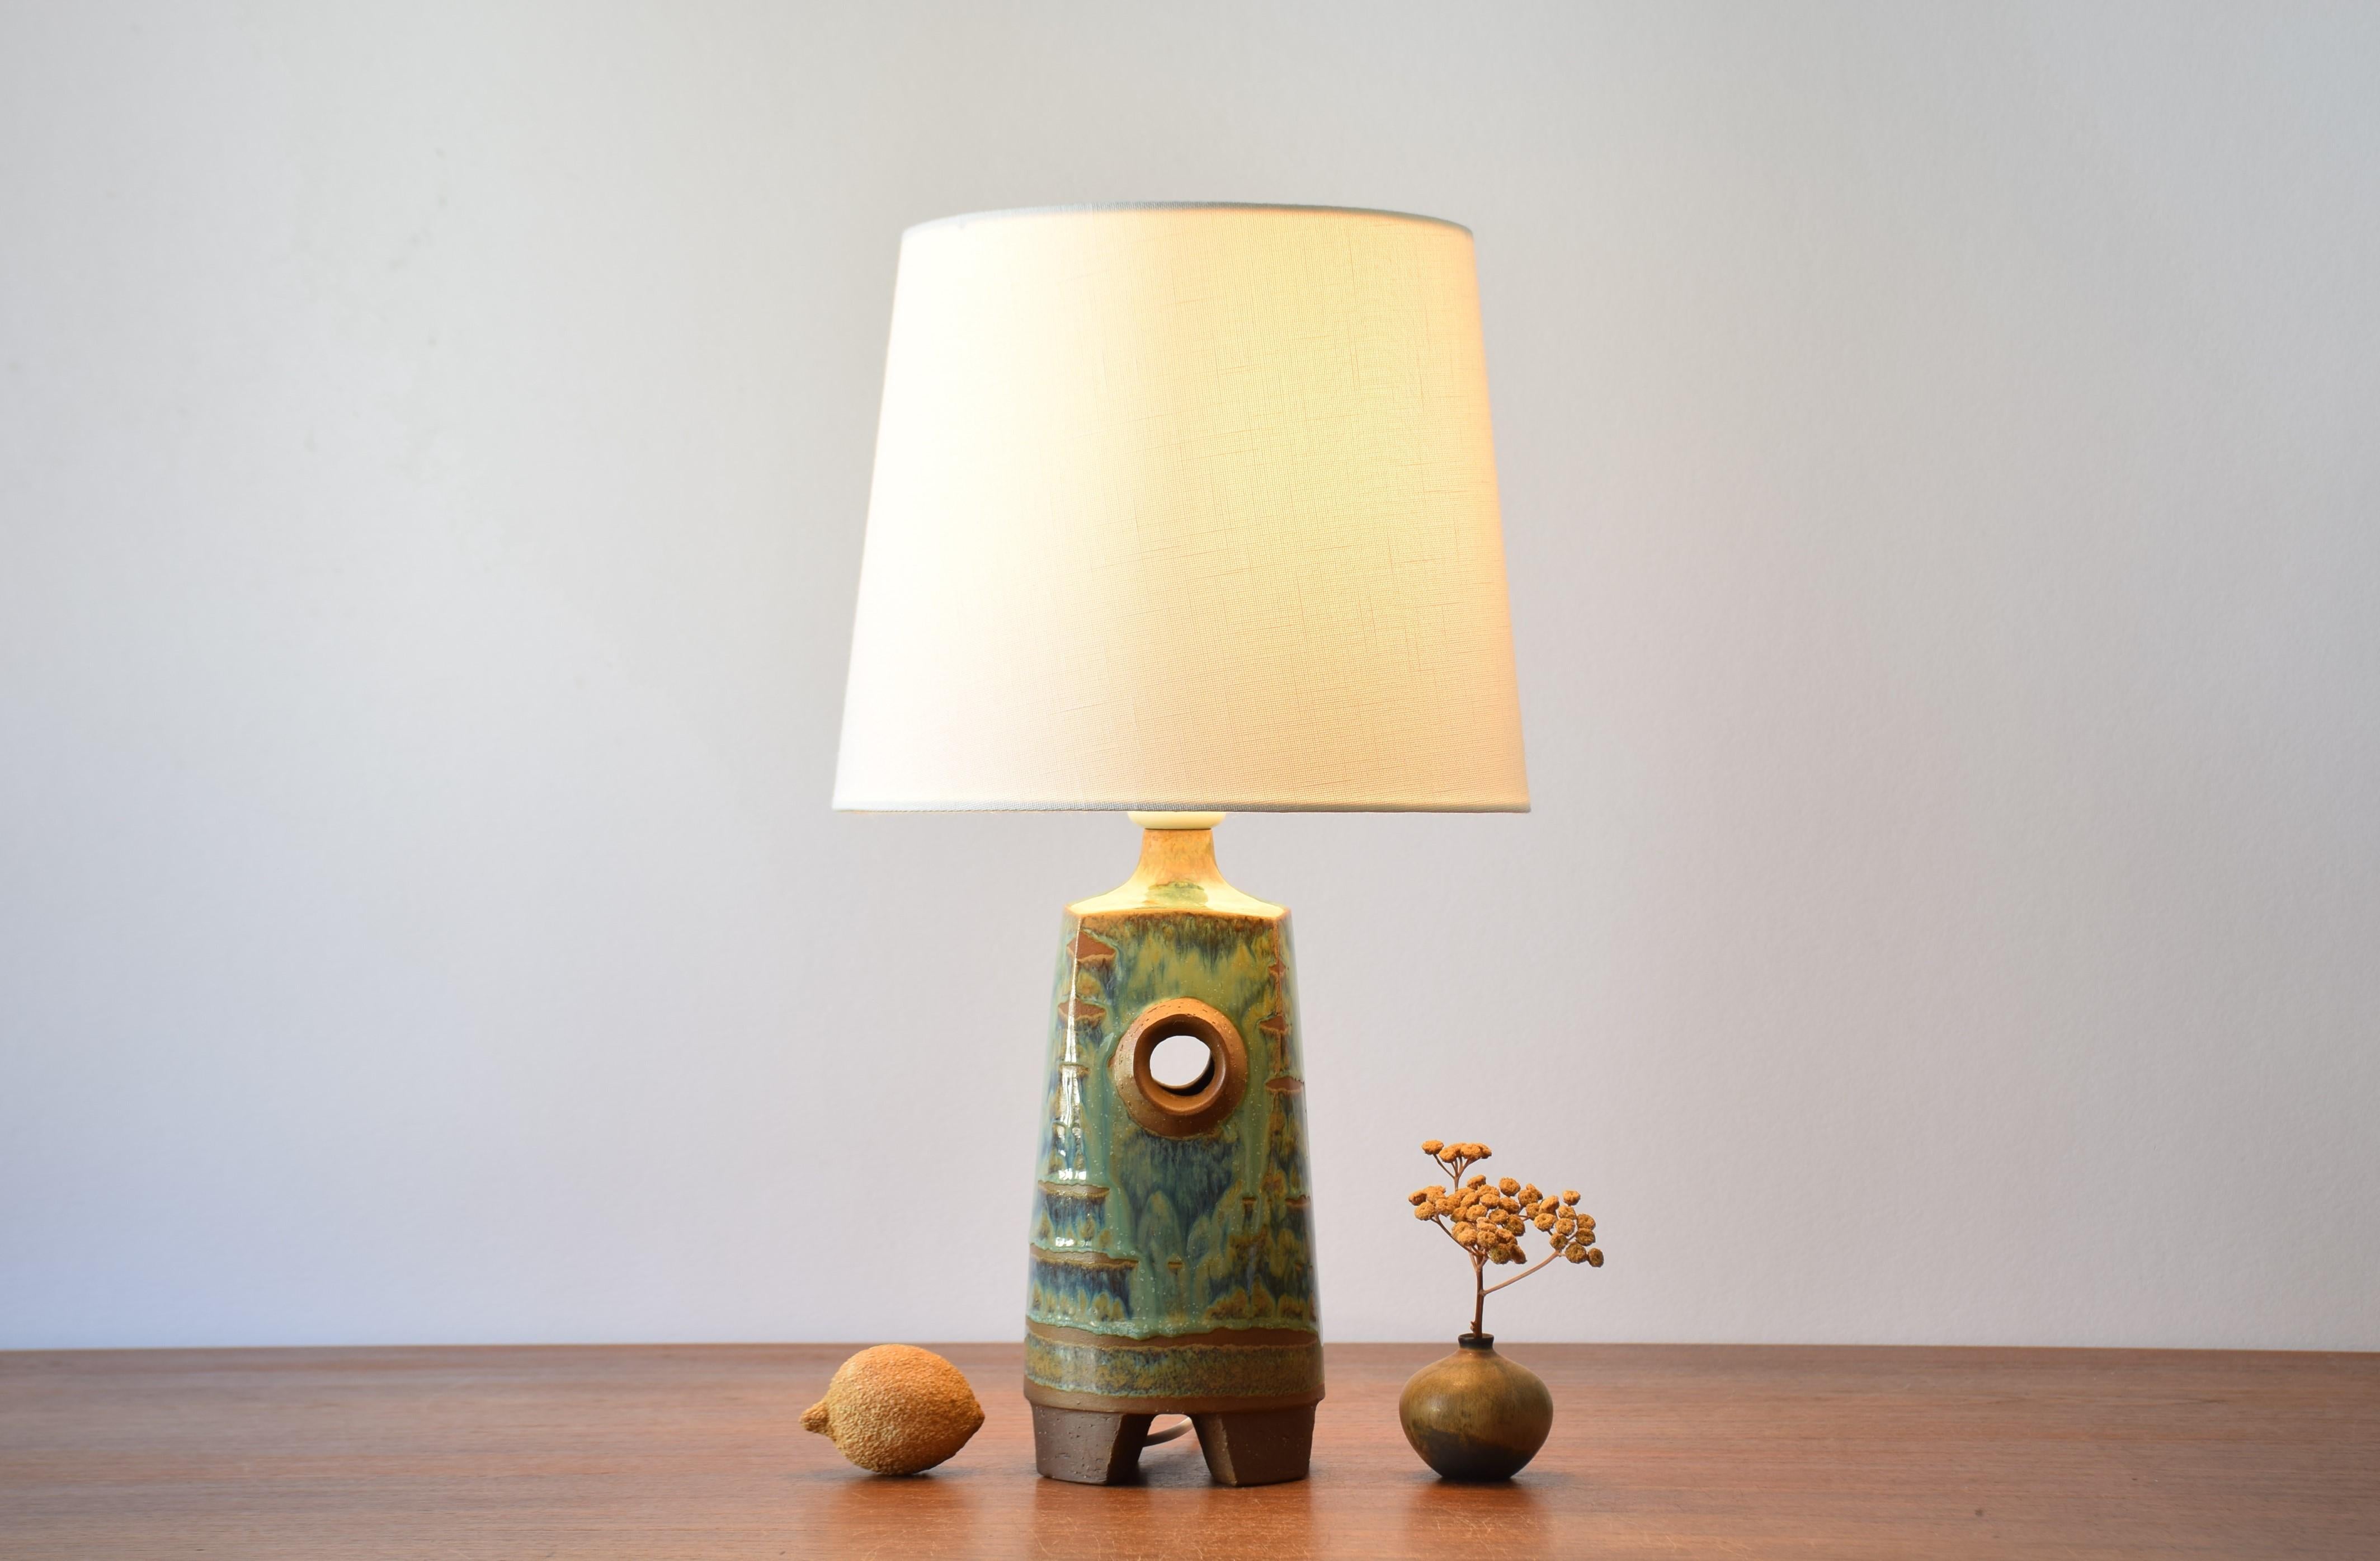 Sculptural Midcentury Danish table lamp from the ceramic workshop of Michael Andersen & Søn (Michael Andersen & Son) on the island Bornholm. Designed and made ca 1960s. The design is attributed to either Marianne Starck or Knud Basse but not